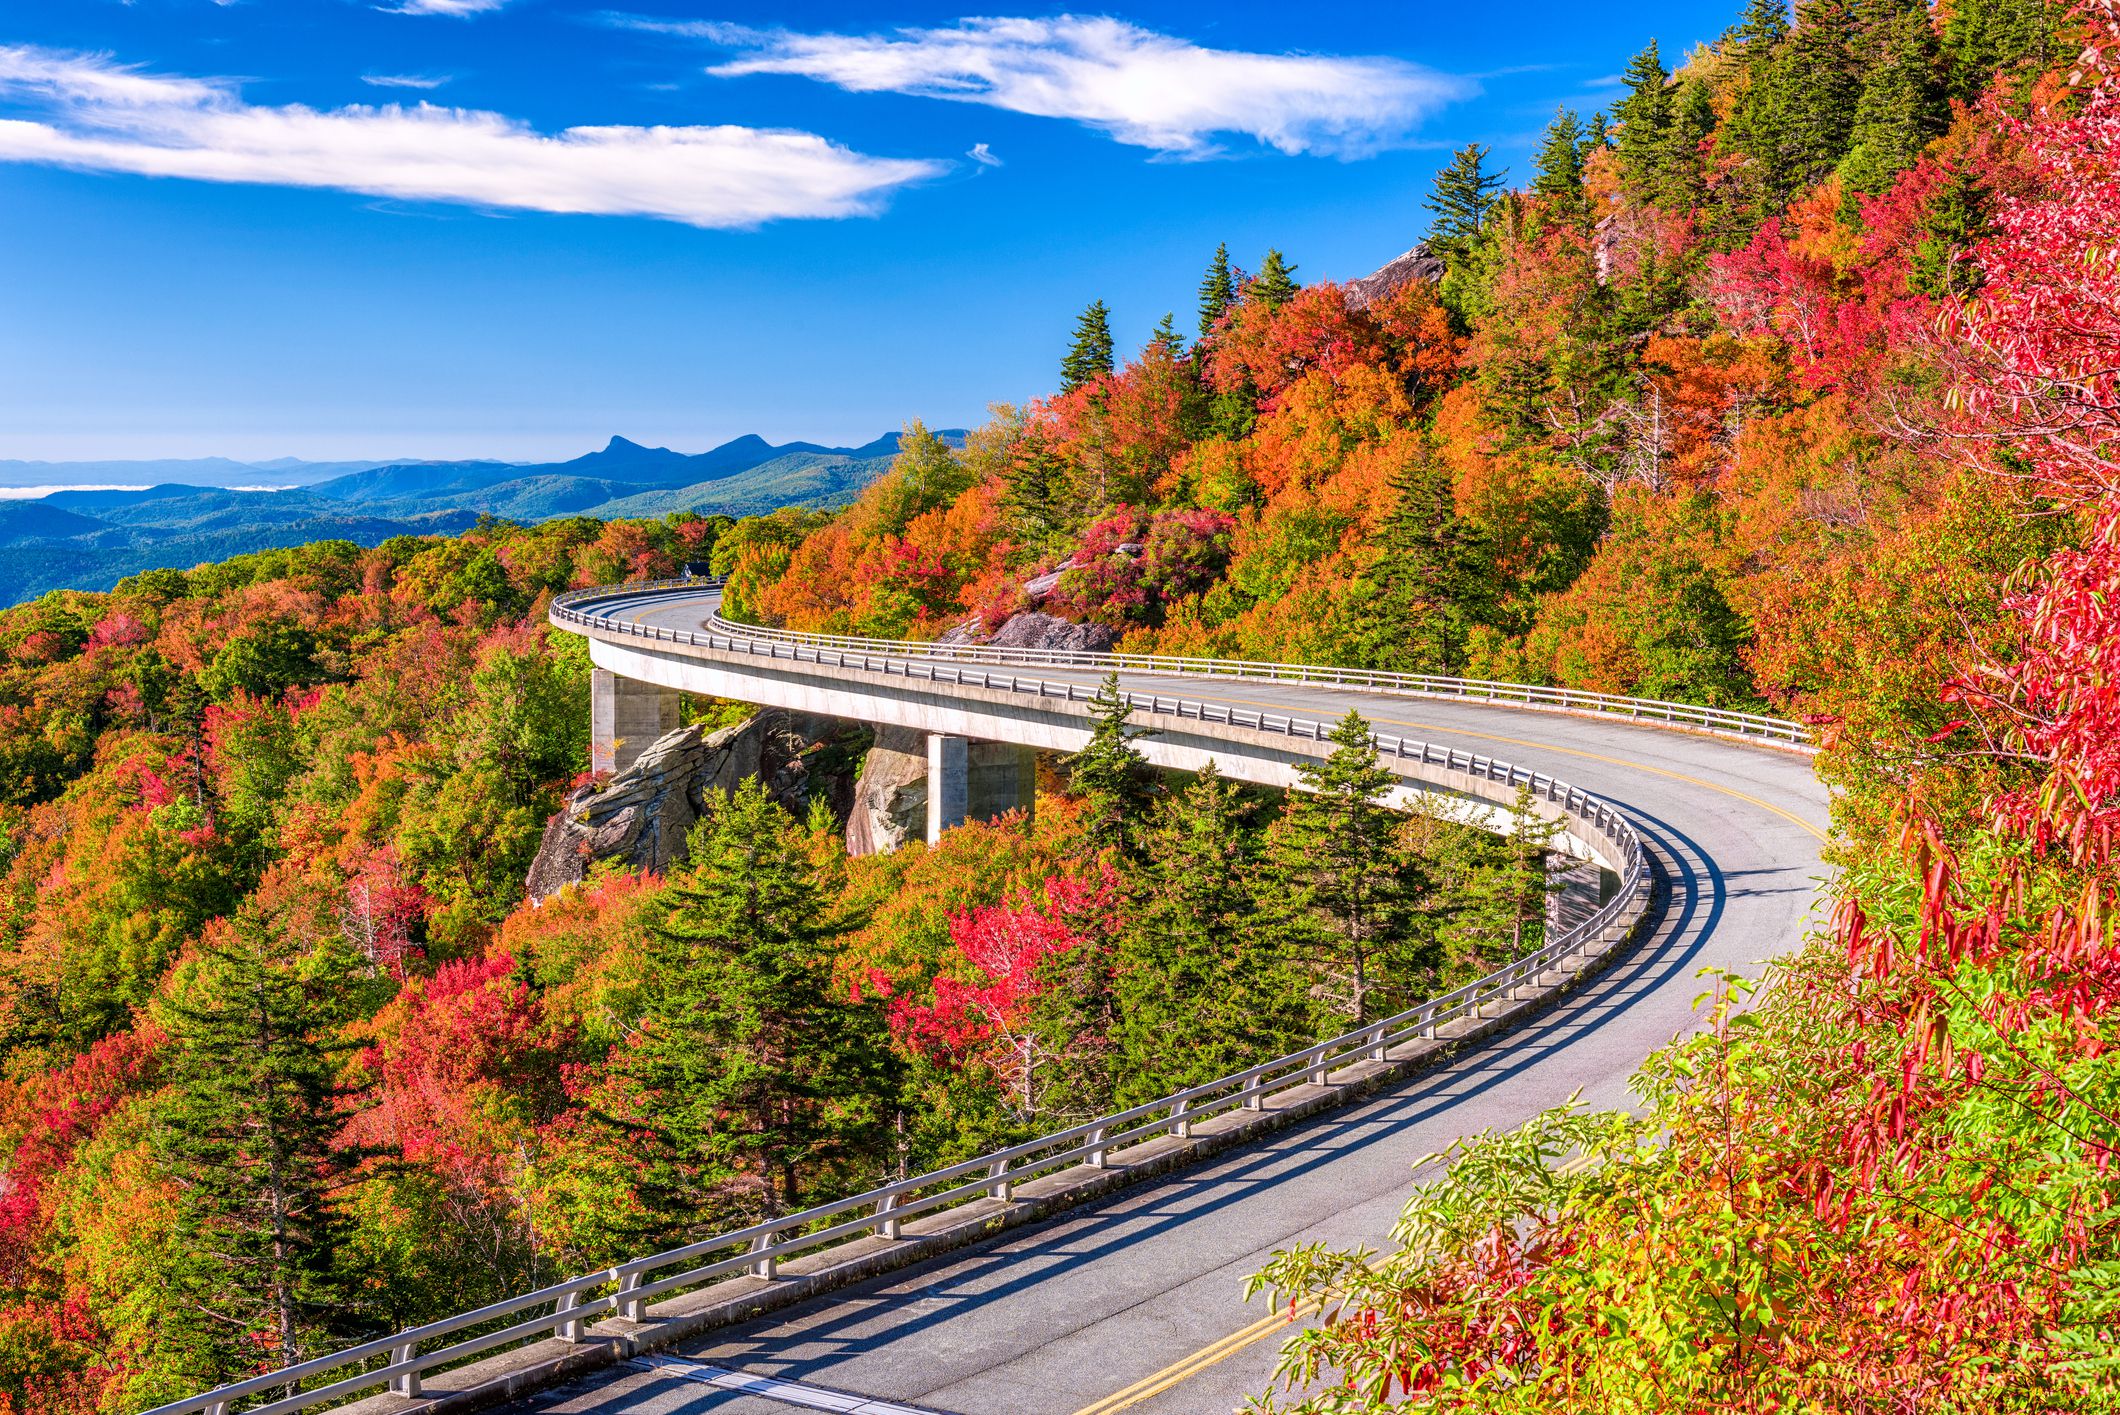 <p><b>Virginia and North Carolina</b>In the mood for a more relaxed Appalachian excursion? Sprawling 469 miles, the <a href="https://www.brpfoundation.org/">Blue Ridge Parkway</a> has a 45 mph speed limit and gentle curves that make this ride ideal for beginners or anyone who wants to slow down and enjoy the view. "The parkway has breathtaking scenery, innumerable curves that make the ride interesting, the roadway is well-kept, and perhaps most important of all, there are no traffic lights or stop signs," says Mike Grady, a motorcycle expert with MOTORCYCLEiD. "There are plenty of connecting roads off the parkway for access to lodging and restaurants."</p>  <p><b>Can't-miss stop:</b> Hop off the parkway in quirky Asheville, North Carolina, where the staggering Biltmore Estate is the most notable of many tourist draws. If you're willing to go further afield, Grady recommends the rare motorcycle collection at the <a href="https://wheelsthroughtime.com/">Wheels Through Time Museum</a> in Maggie Valley, about 40 minutes west of Asheville. </p>